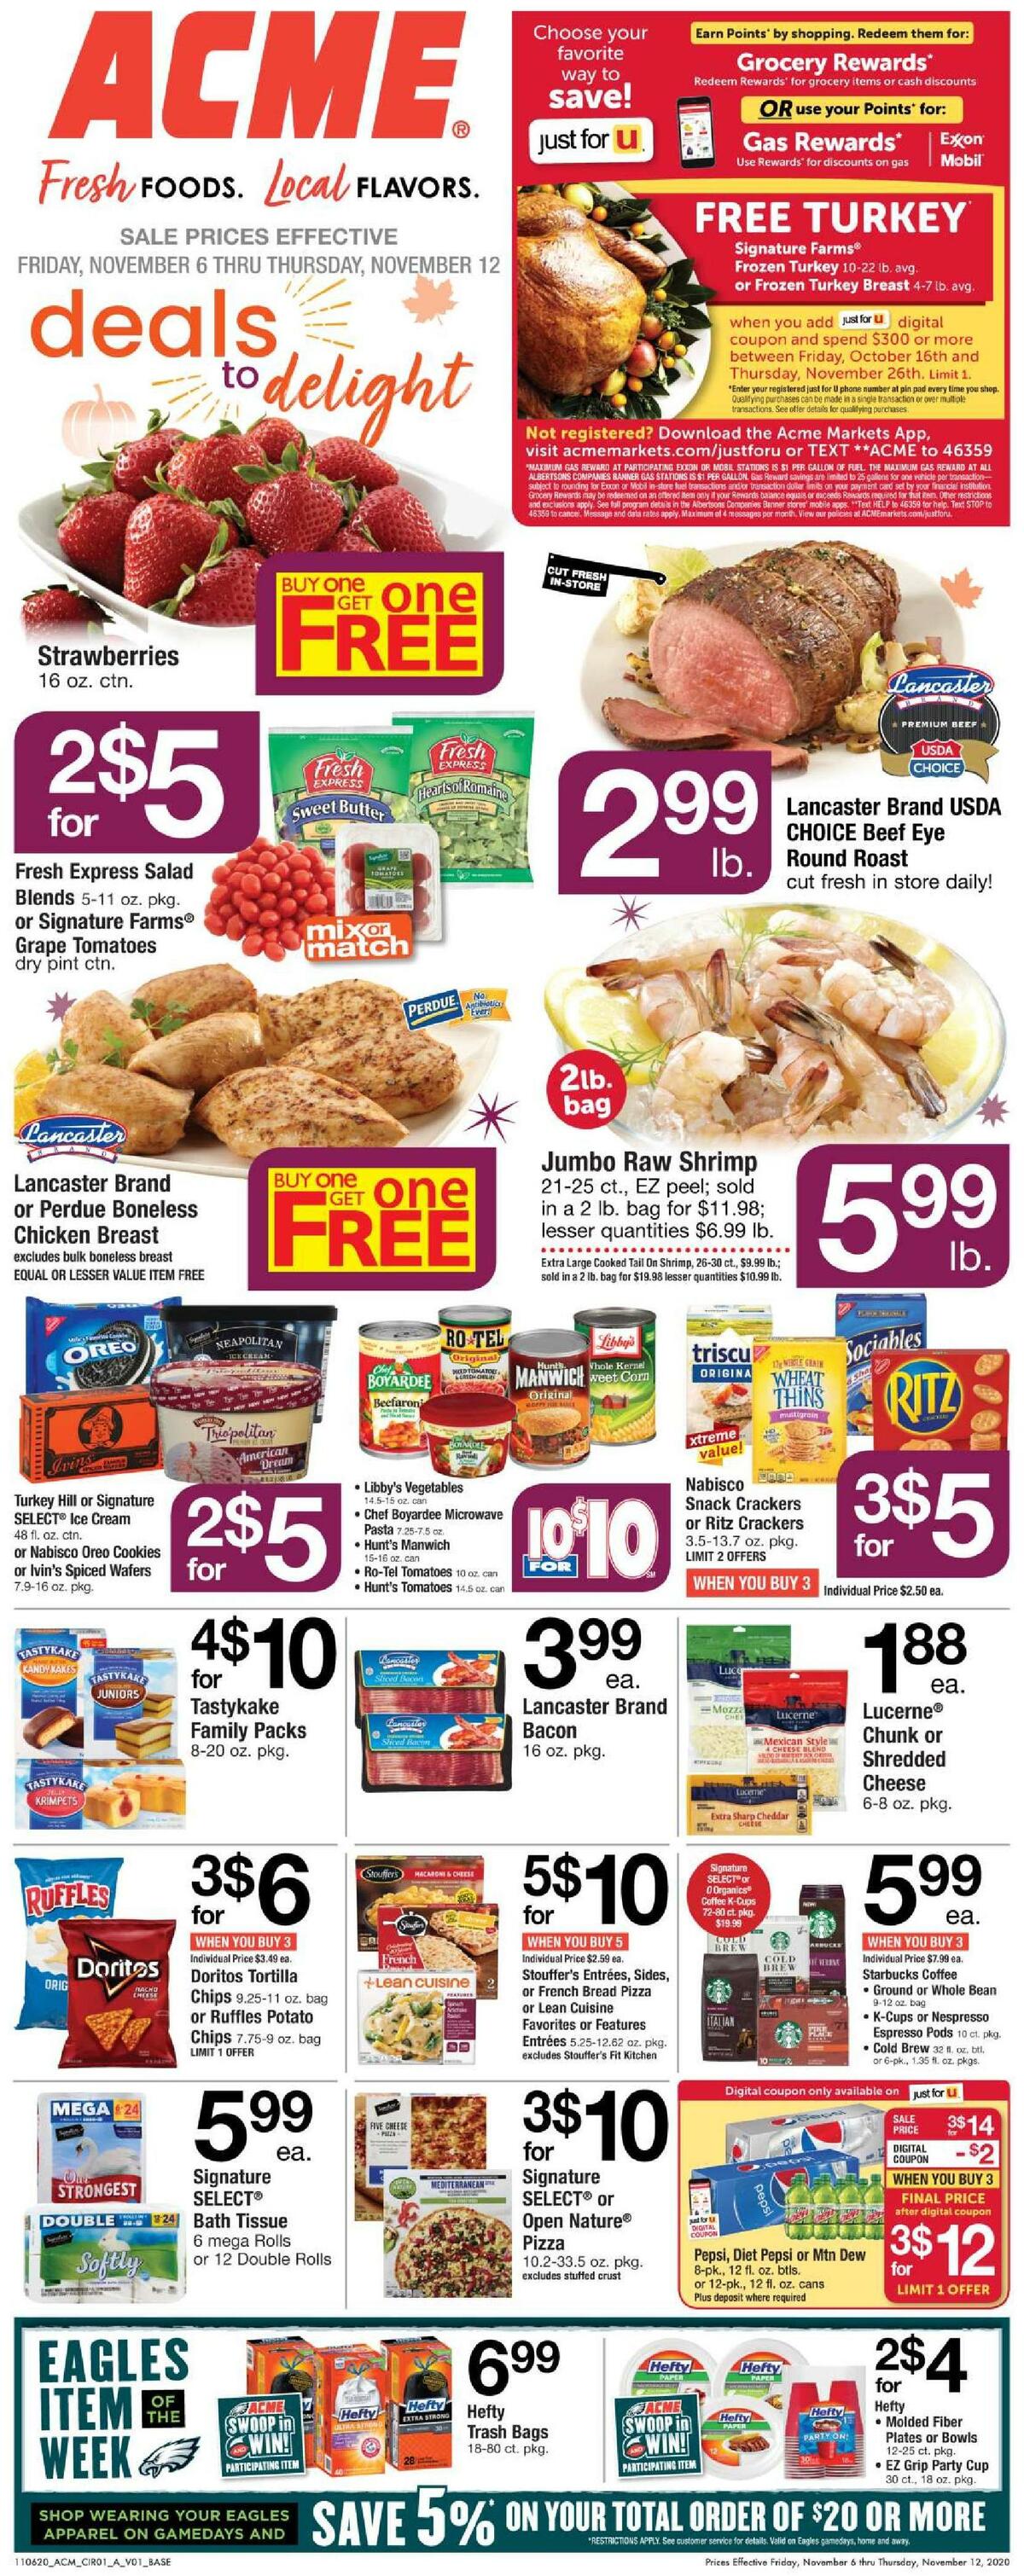 ACME Markets Weekly Ads & Special Buys from November 6